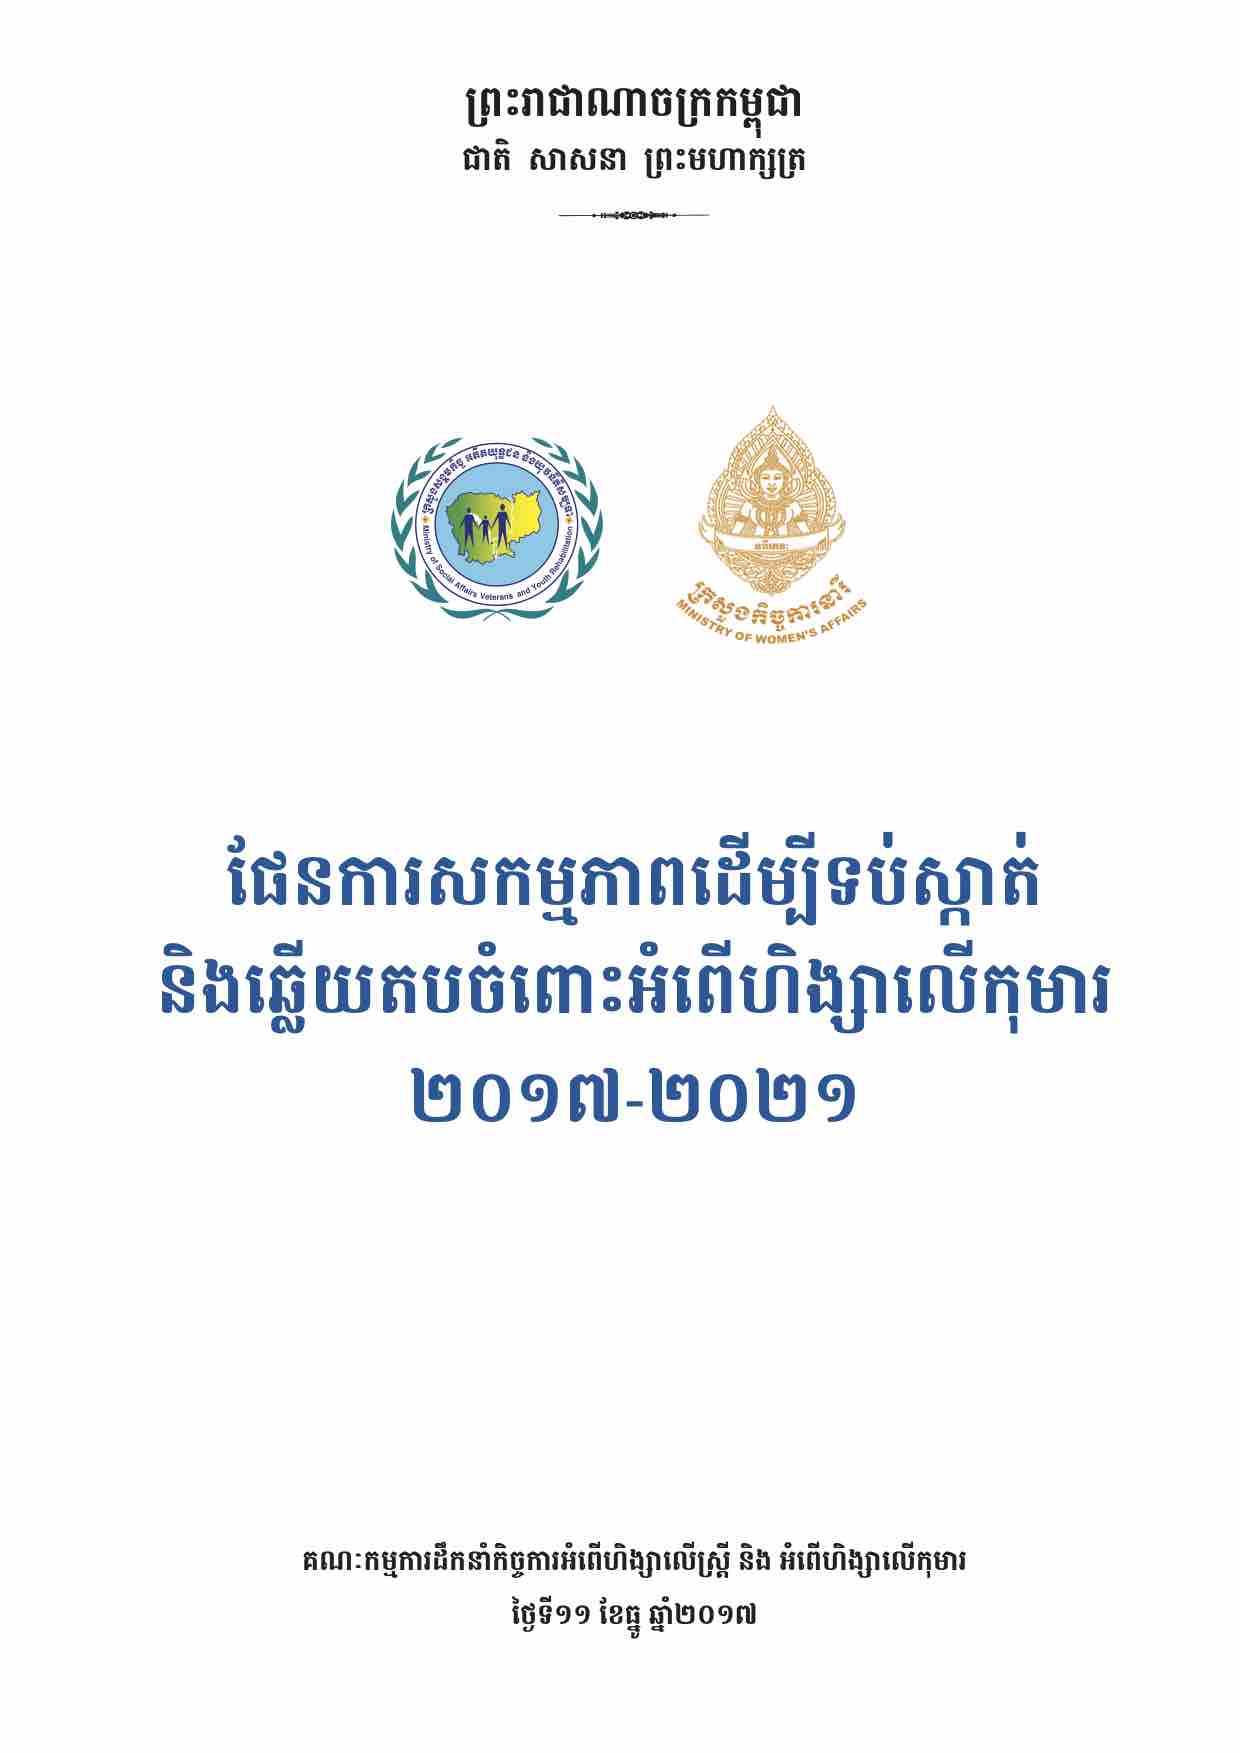 https://strongfamily.mosvy.gov.kh/wp-content/uploads/2020/02/Cambodia-Action-Plan-to-Prevent-and-Respond-to-Violence-Against-Children-2017-2021-KH.jpg